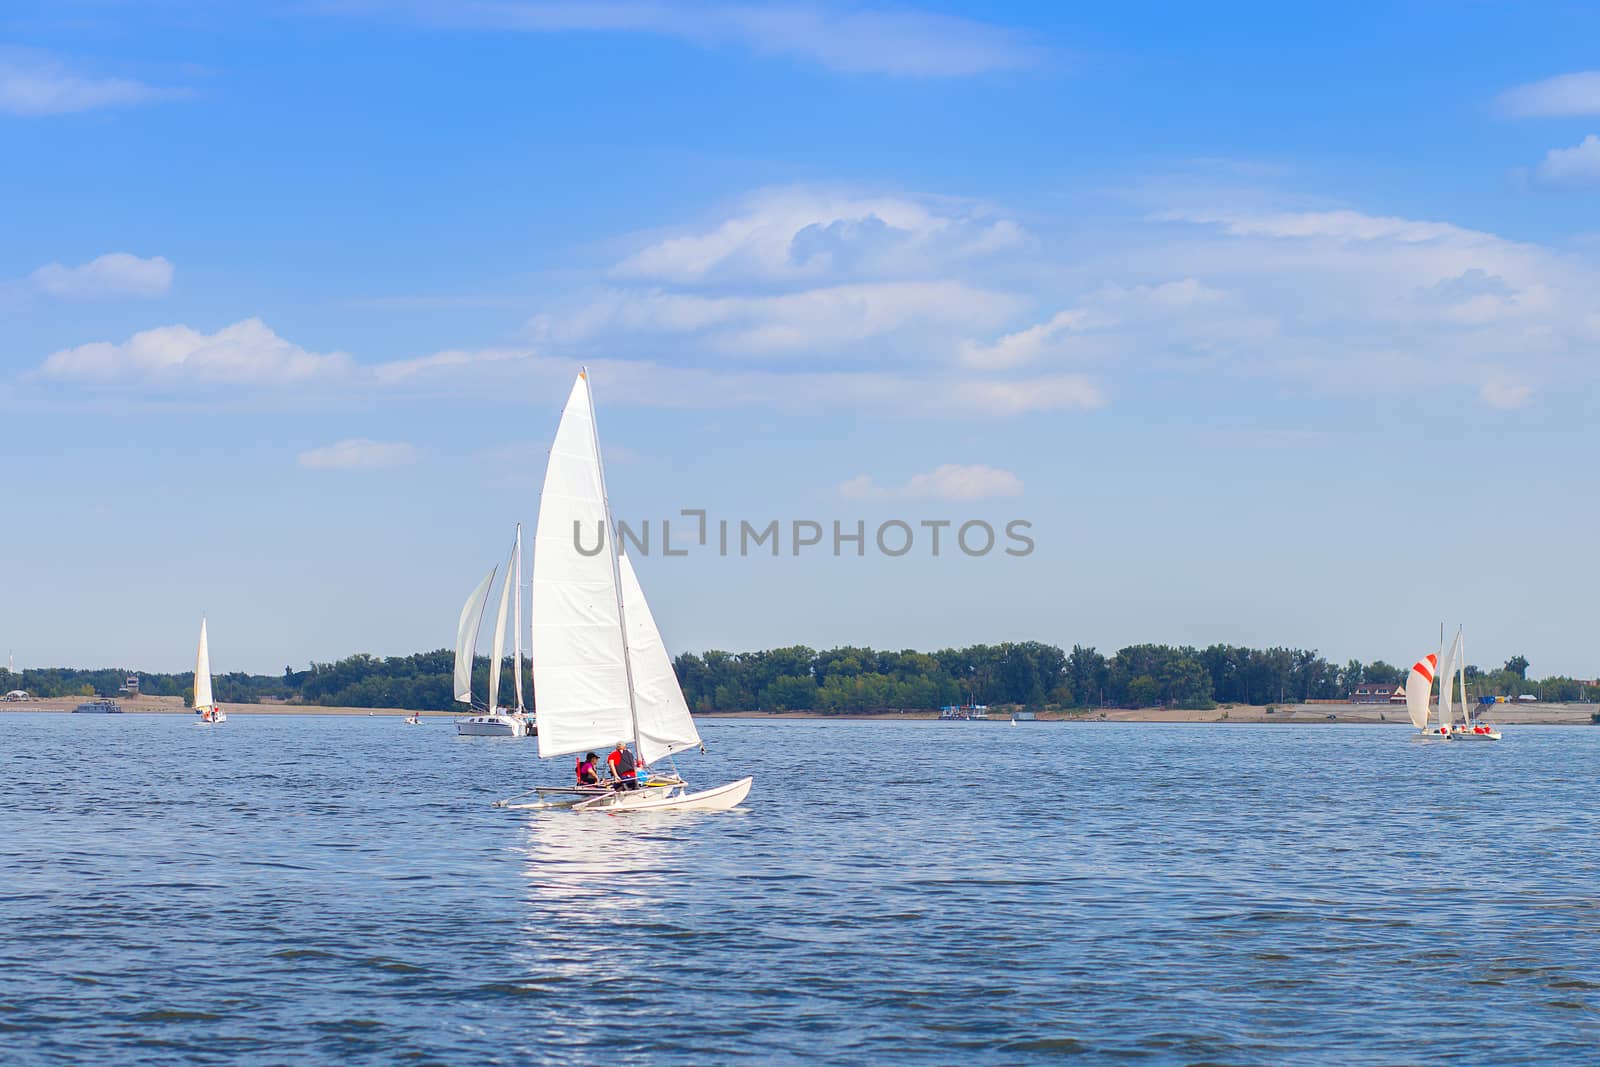 Competition among yachts with sails on the water of the Volga River